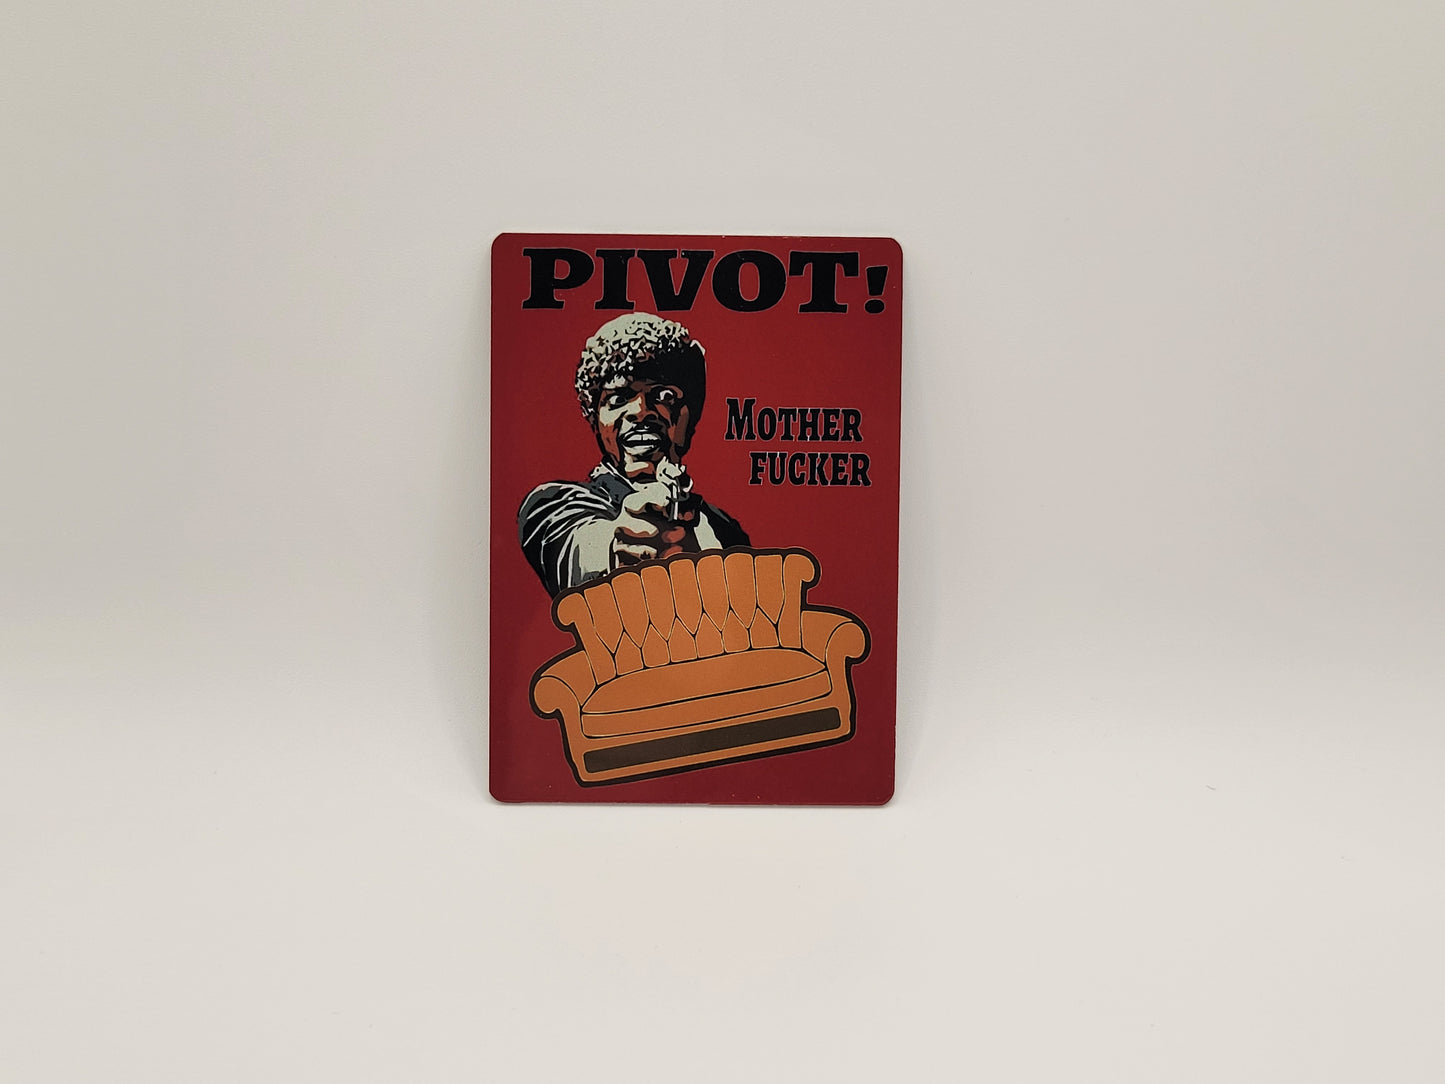 PIVOT Mother F***er playing card